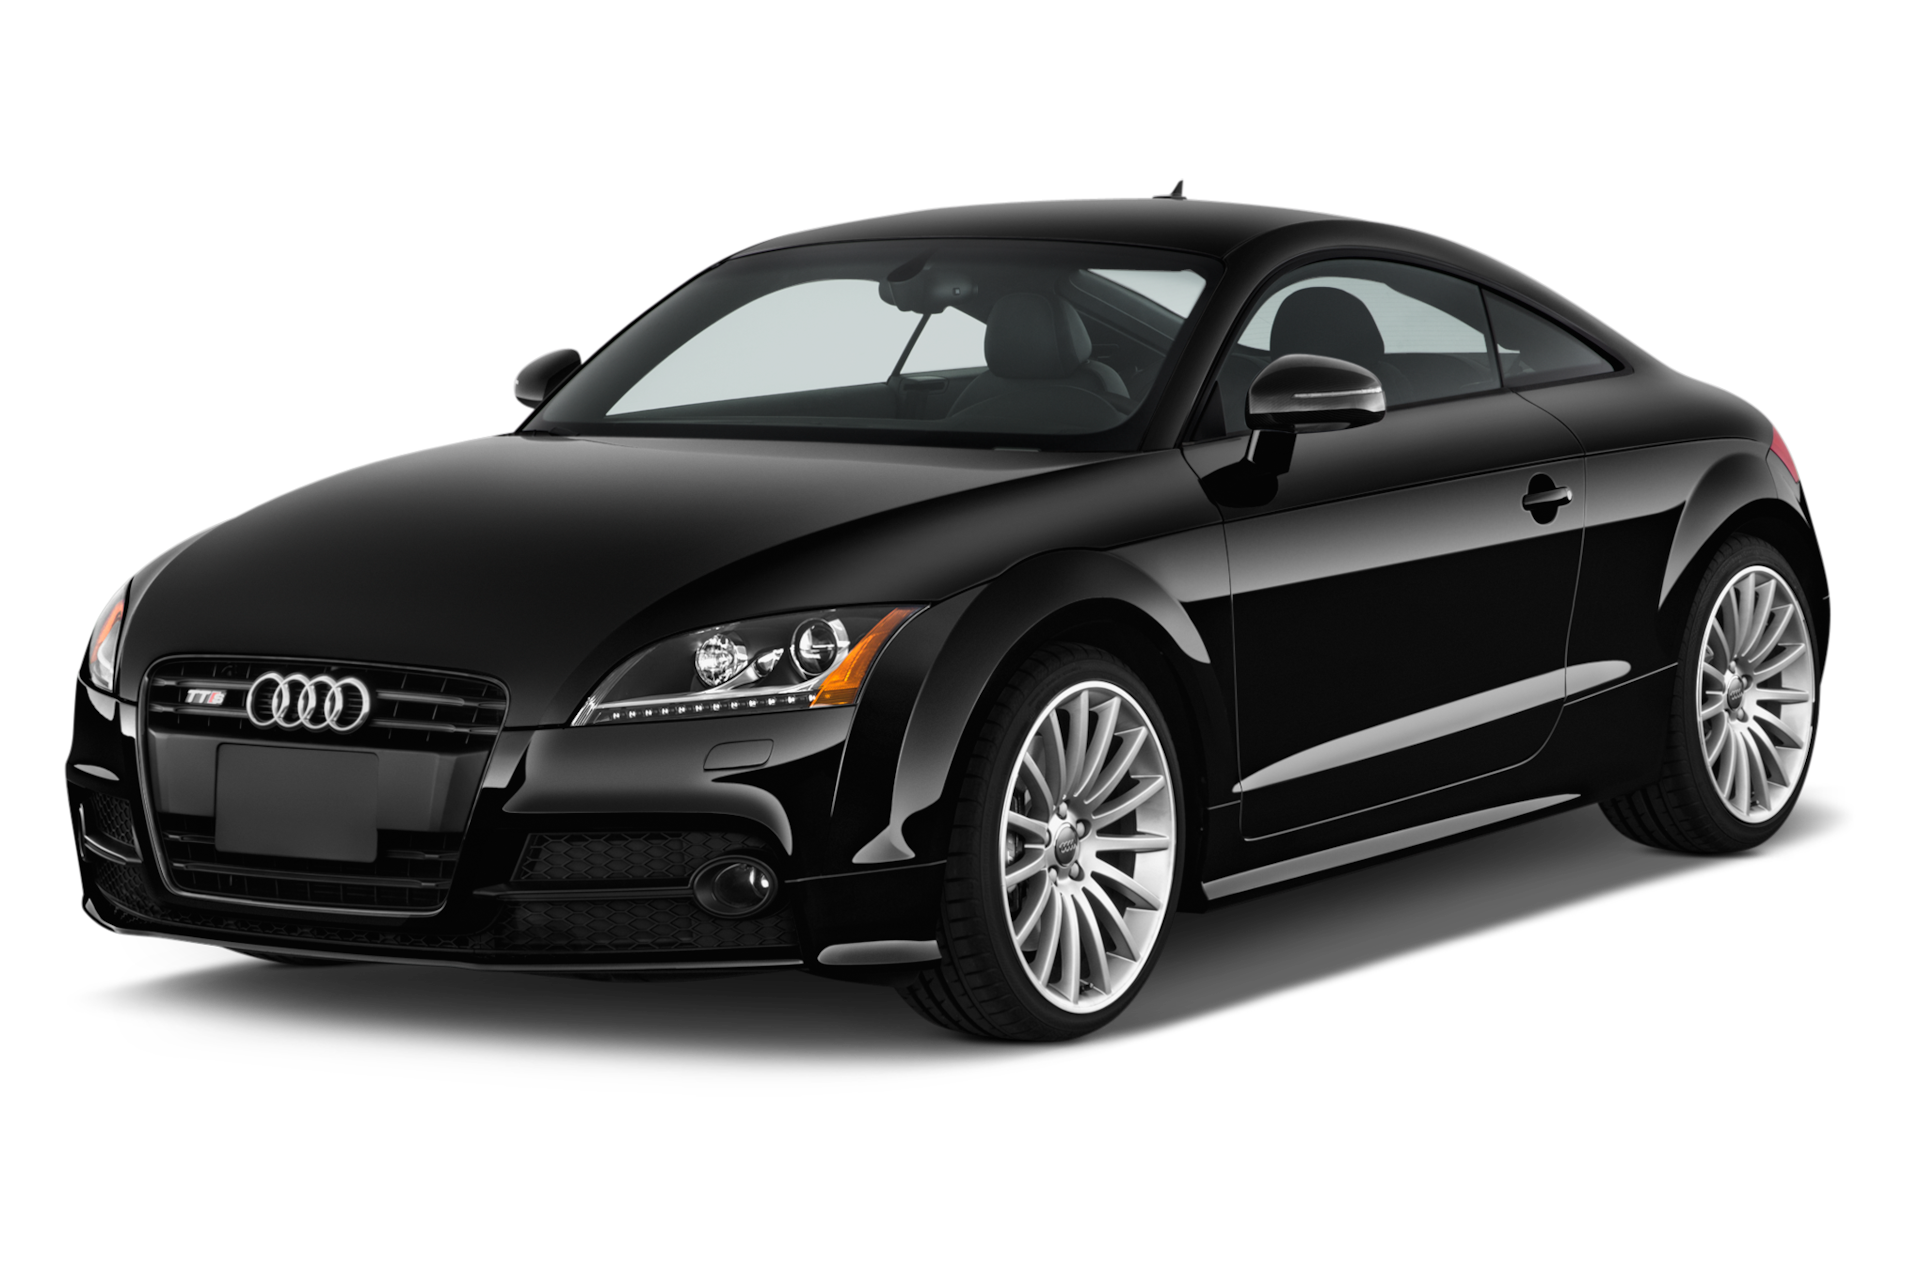 2015 Audi TTS Prices, Reviews, and Photos - MotorTrend